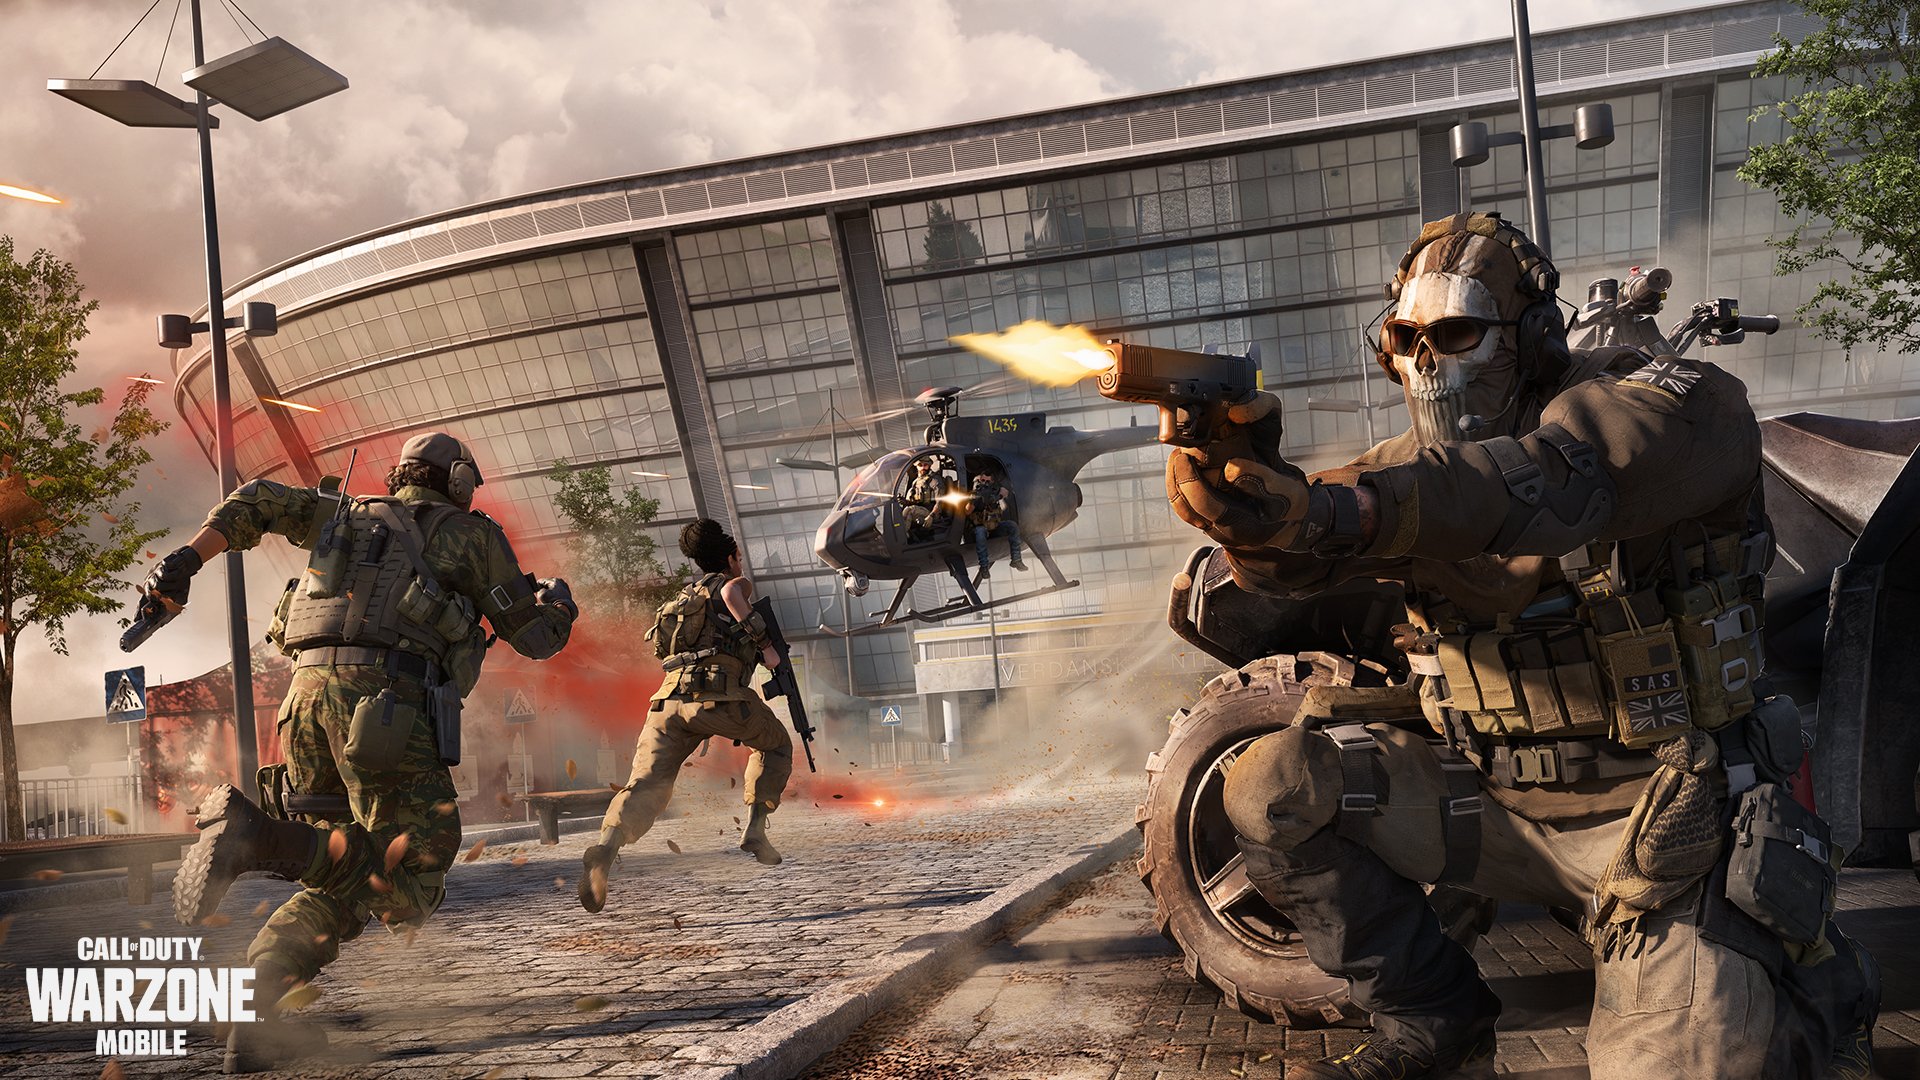 Call of Duty: Warzone Is Coming To Mobile